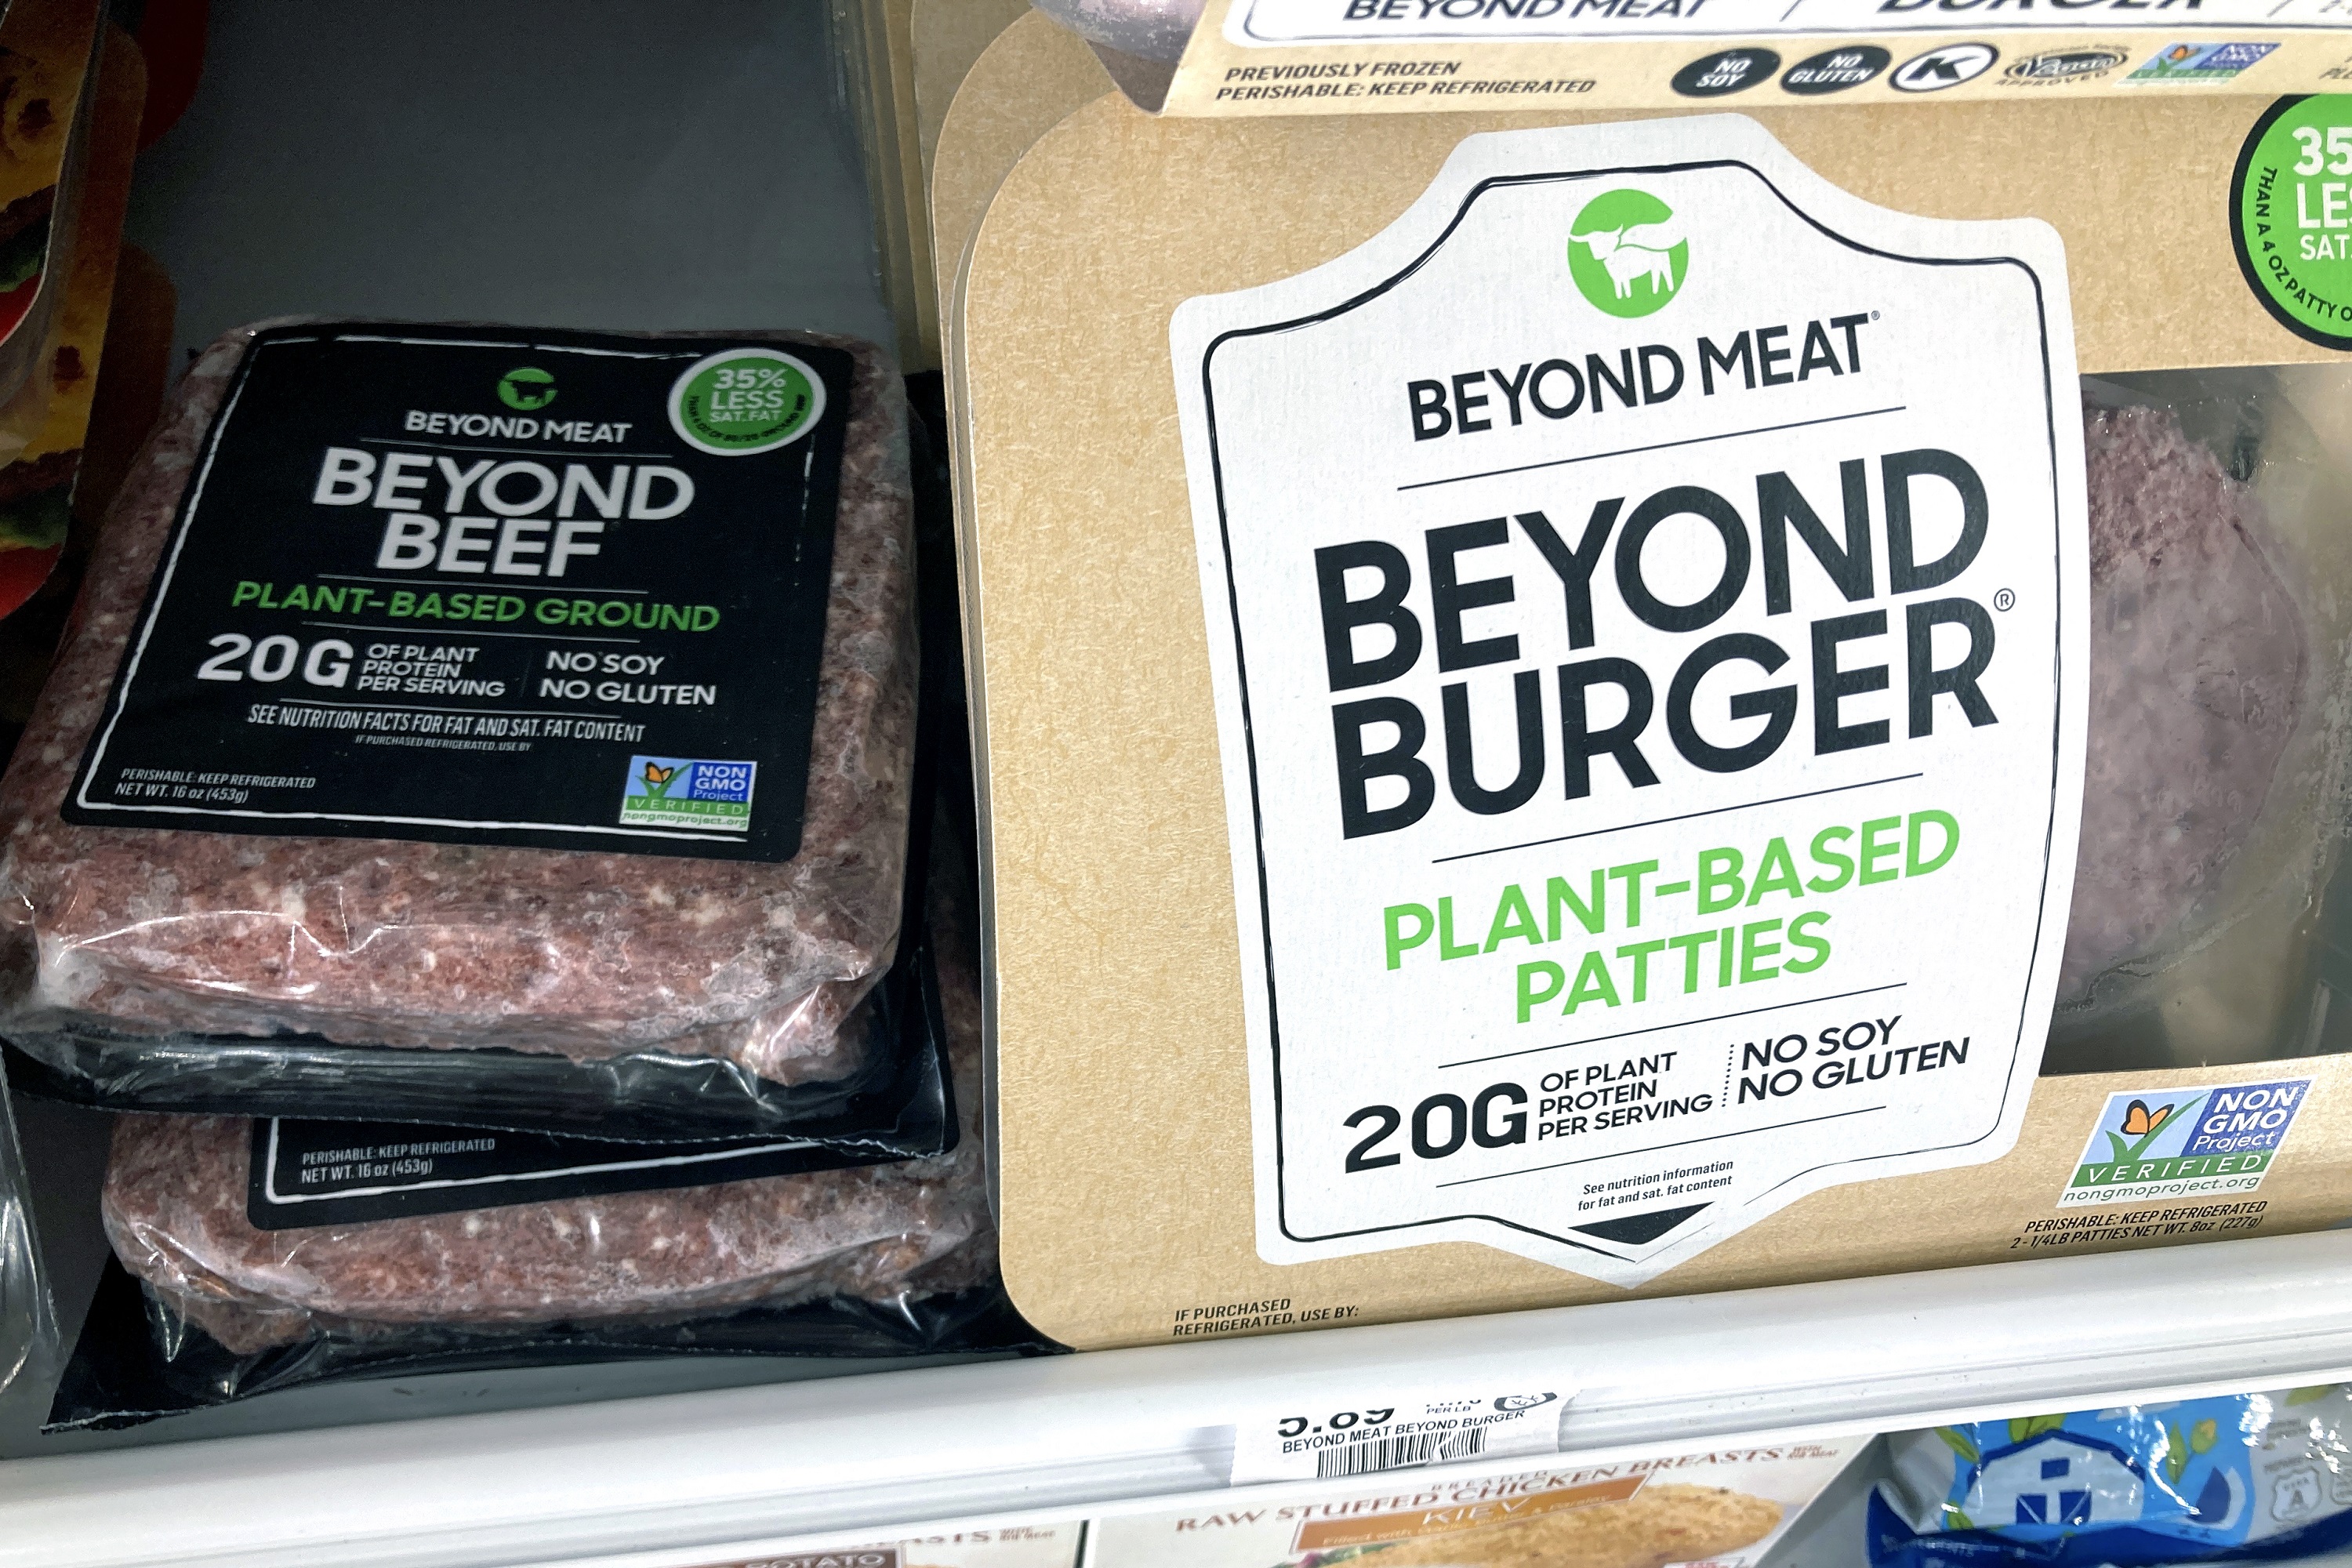 Beyond Meat reduces non-production workforce by 19% due to low demand for plant-based meat.